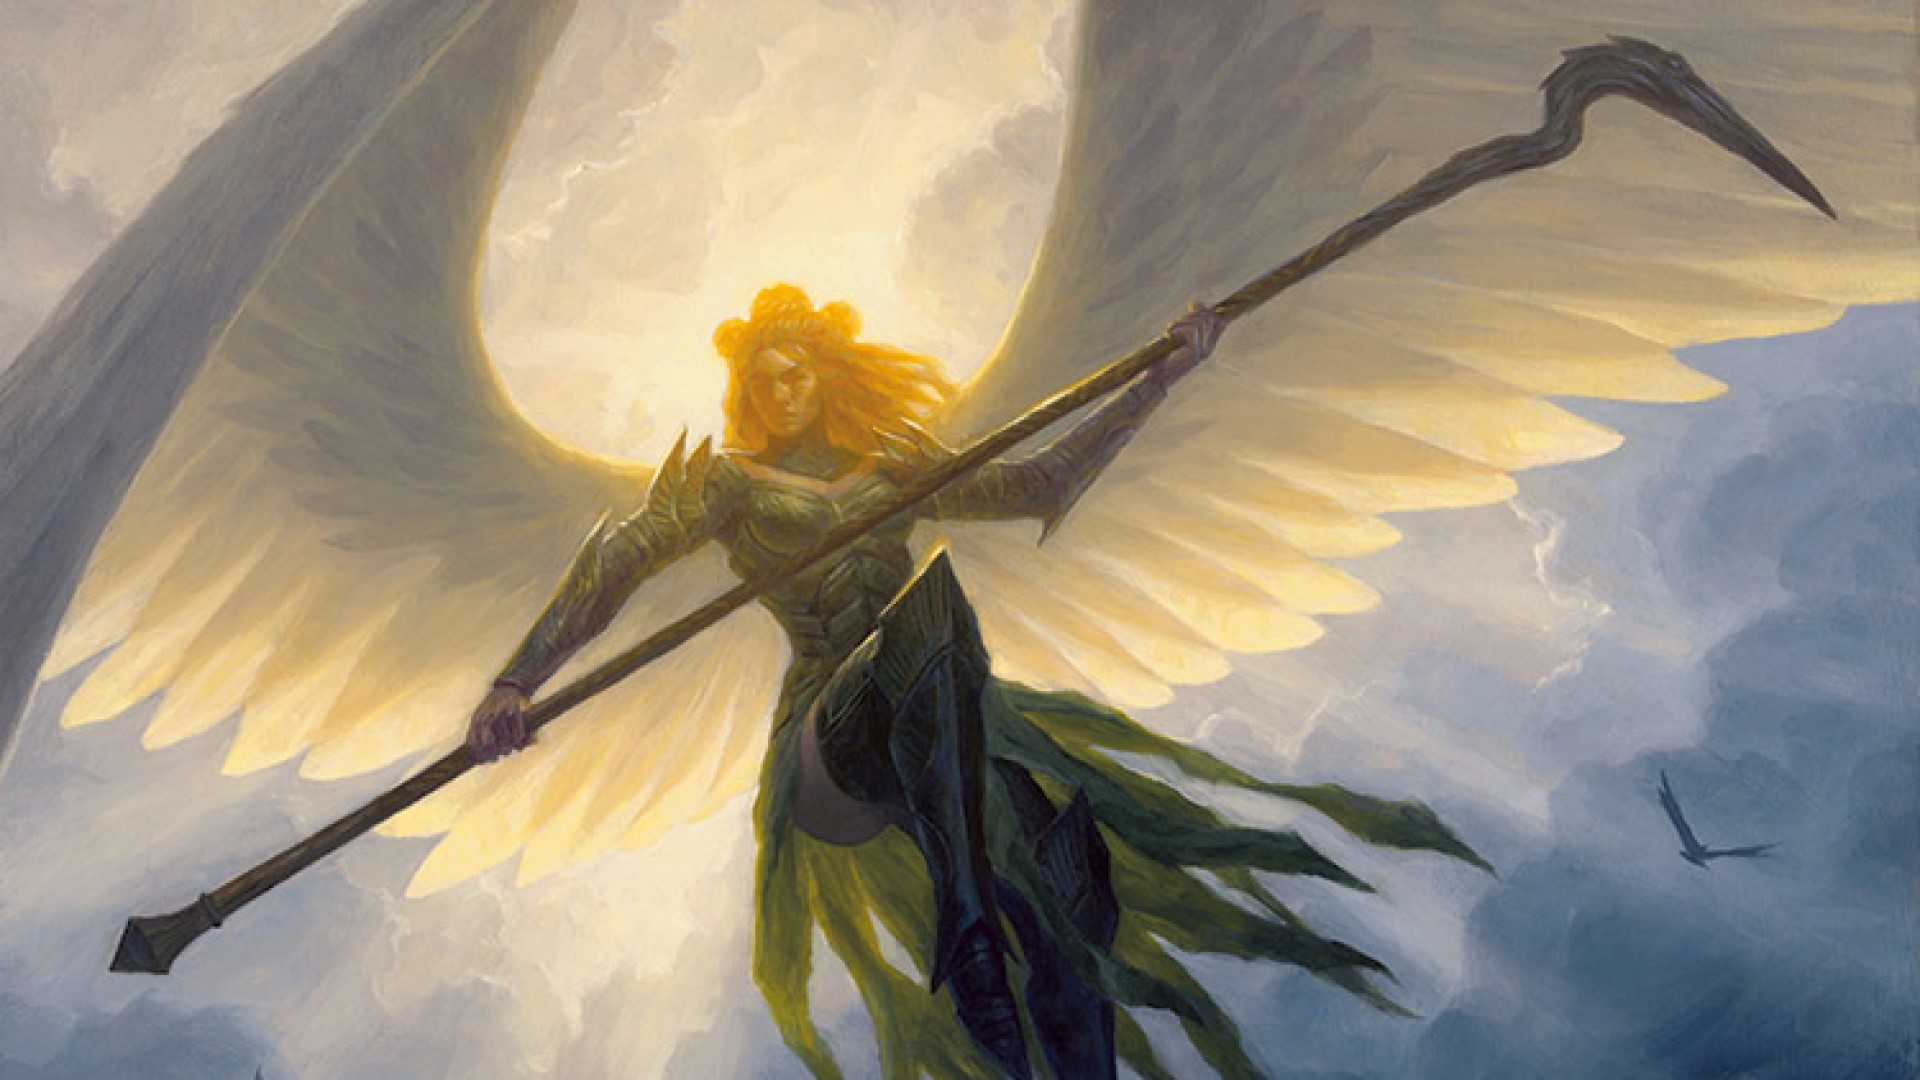 MTG hexproof: An angel lit up by a full moon